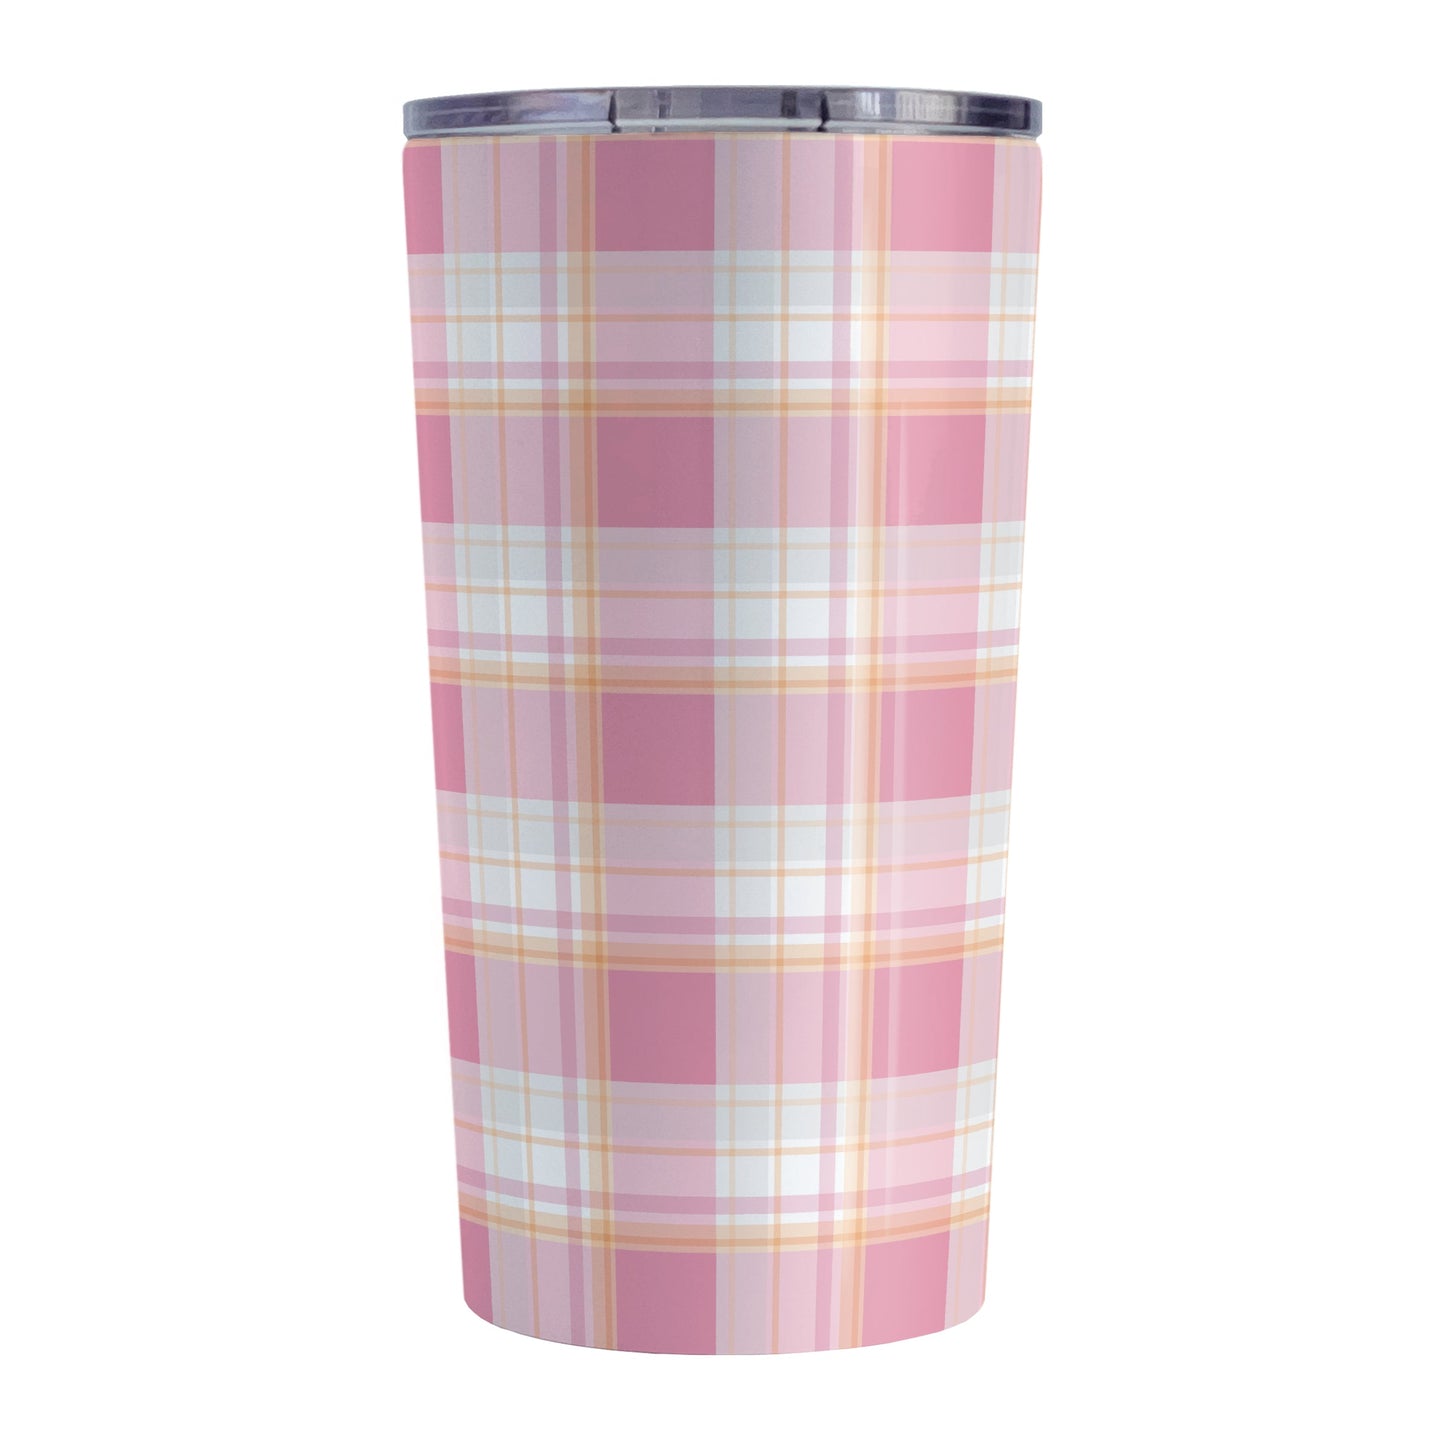 Pink Orange Plaid Tumbler Cup (20oz) at Amy's Coffee Mugs. A stainless steel insulated tumbler cup designed with a pink plaid pattern with orange accents that wraps around the cup. A preppy and stylish cup for people who love pink and orange colors together.